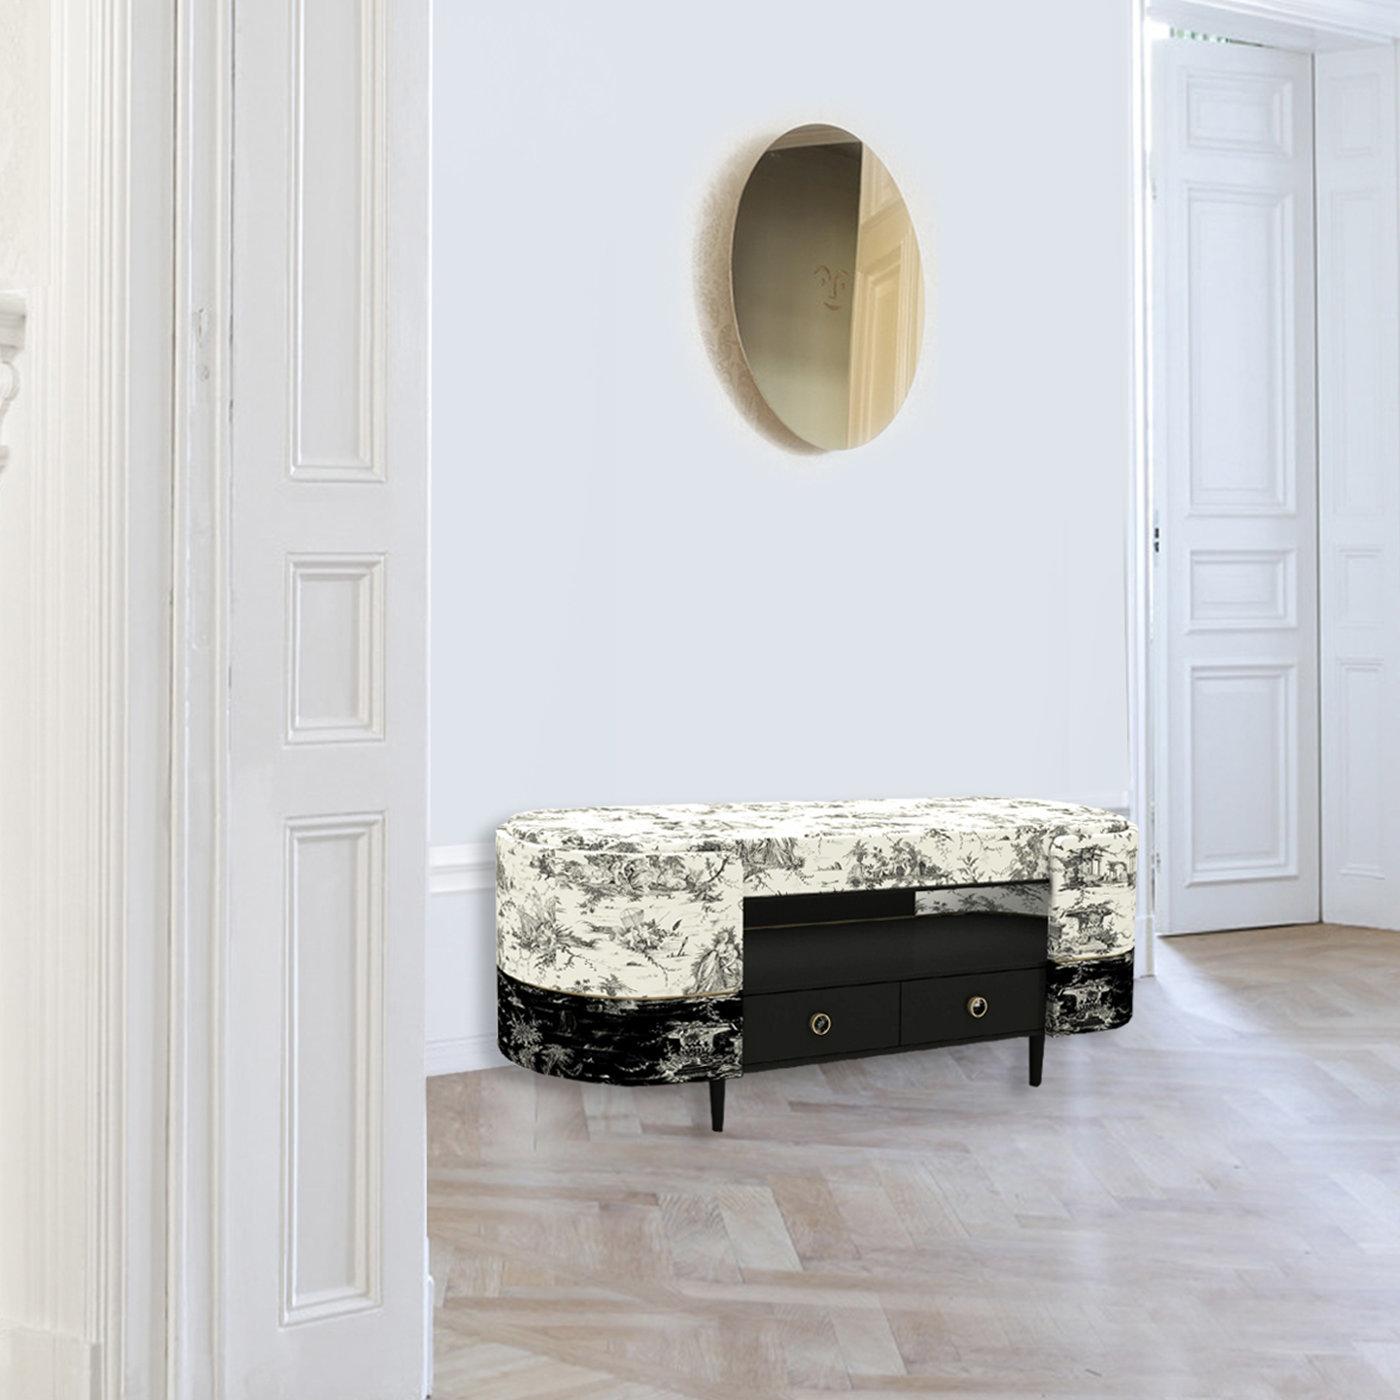 Black-and-White Toile-de-Jouy Bench In New Condition For Sale In Milan, IT